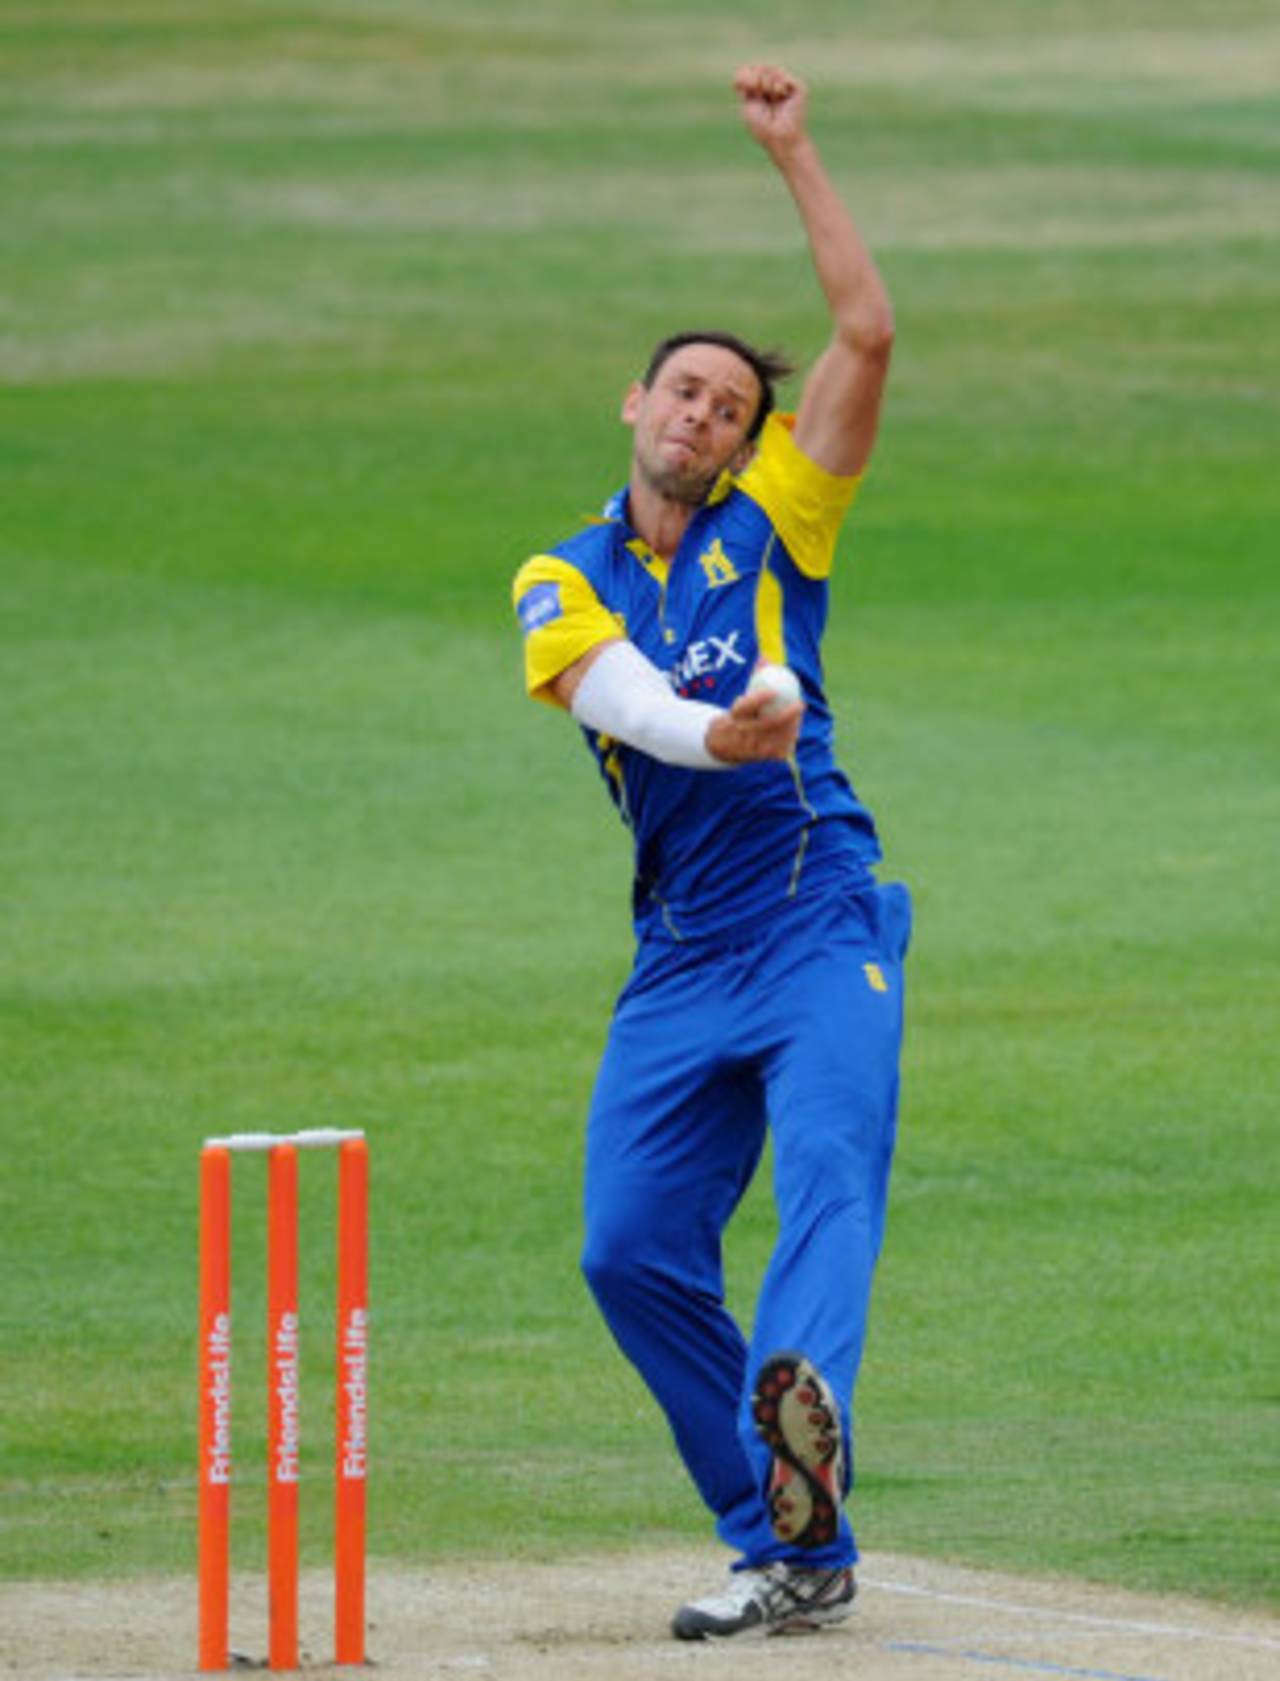 Steffan Piolet took three wickets and a run out, Warwickshire v Northamptonshire, FLt20, Mid/West/Wales, Edgbaston, July 20, 2103